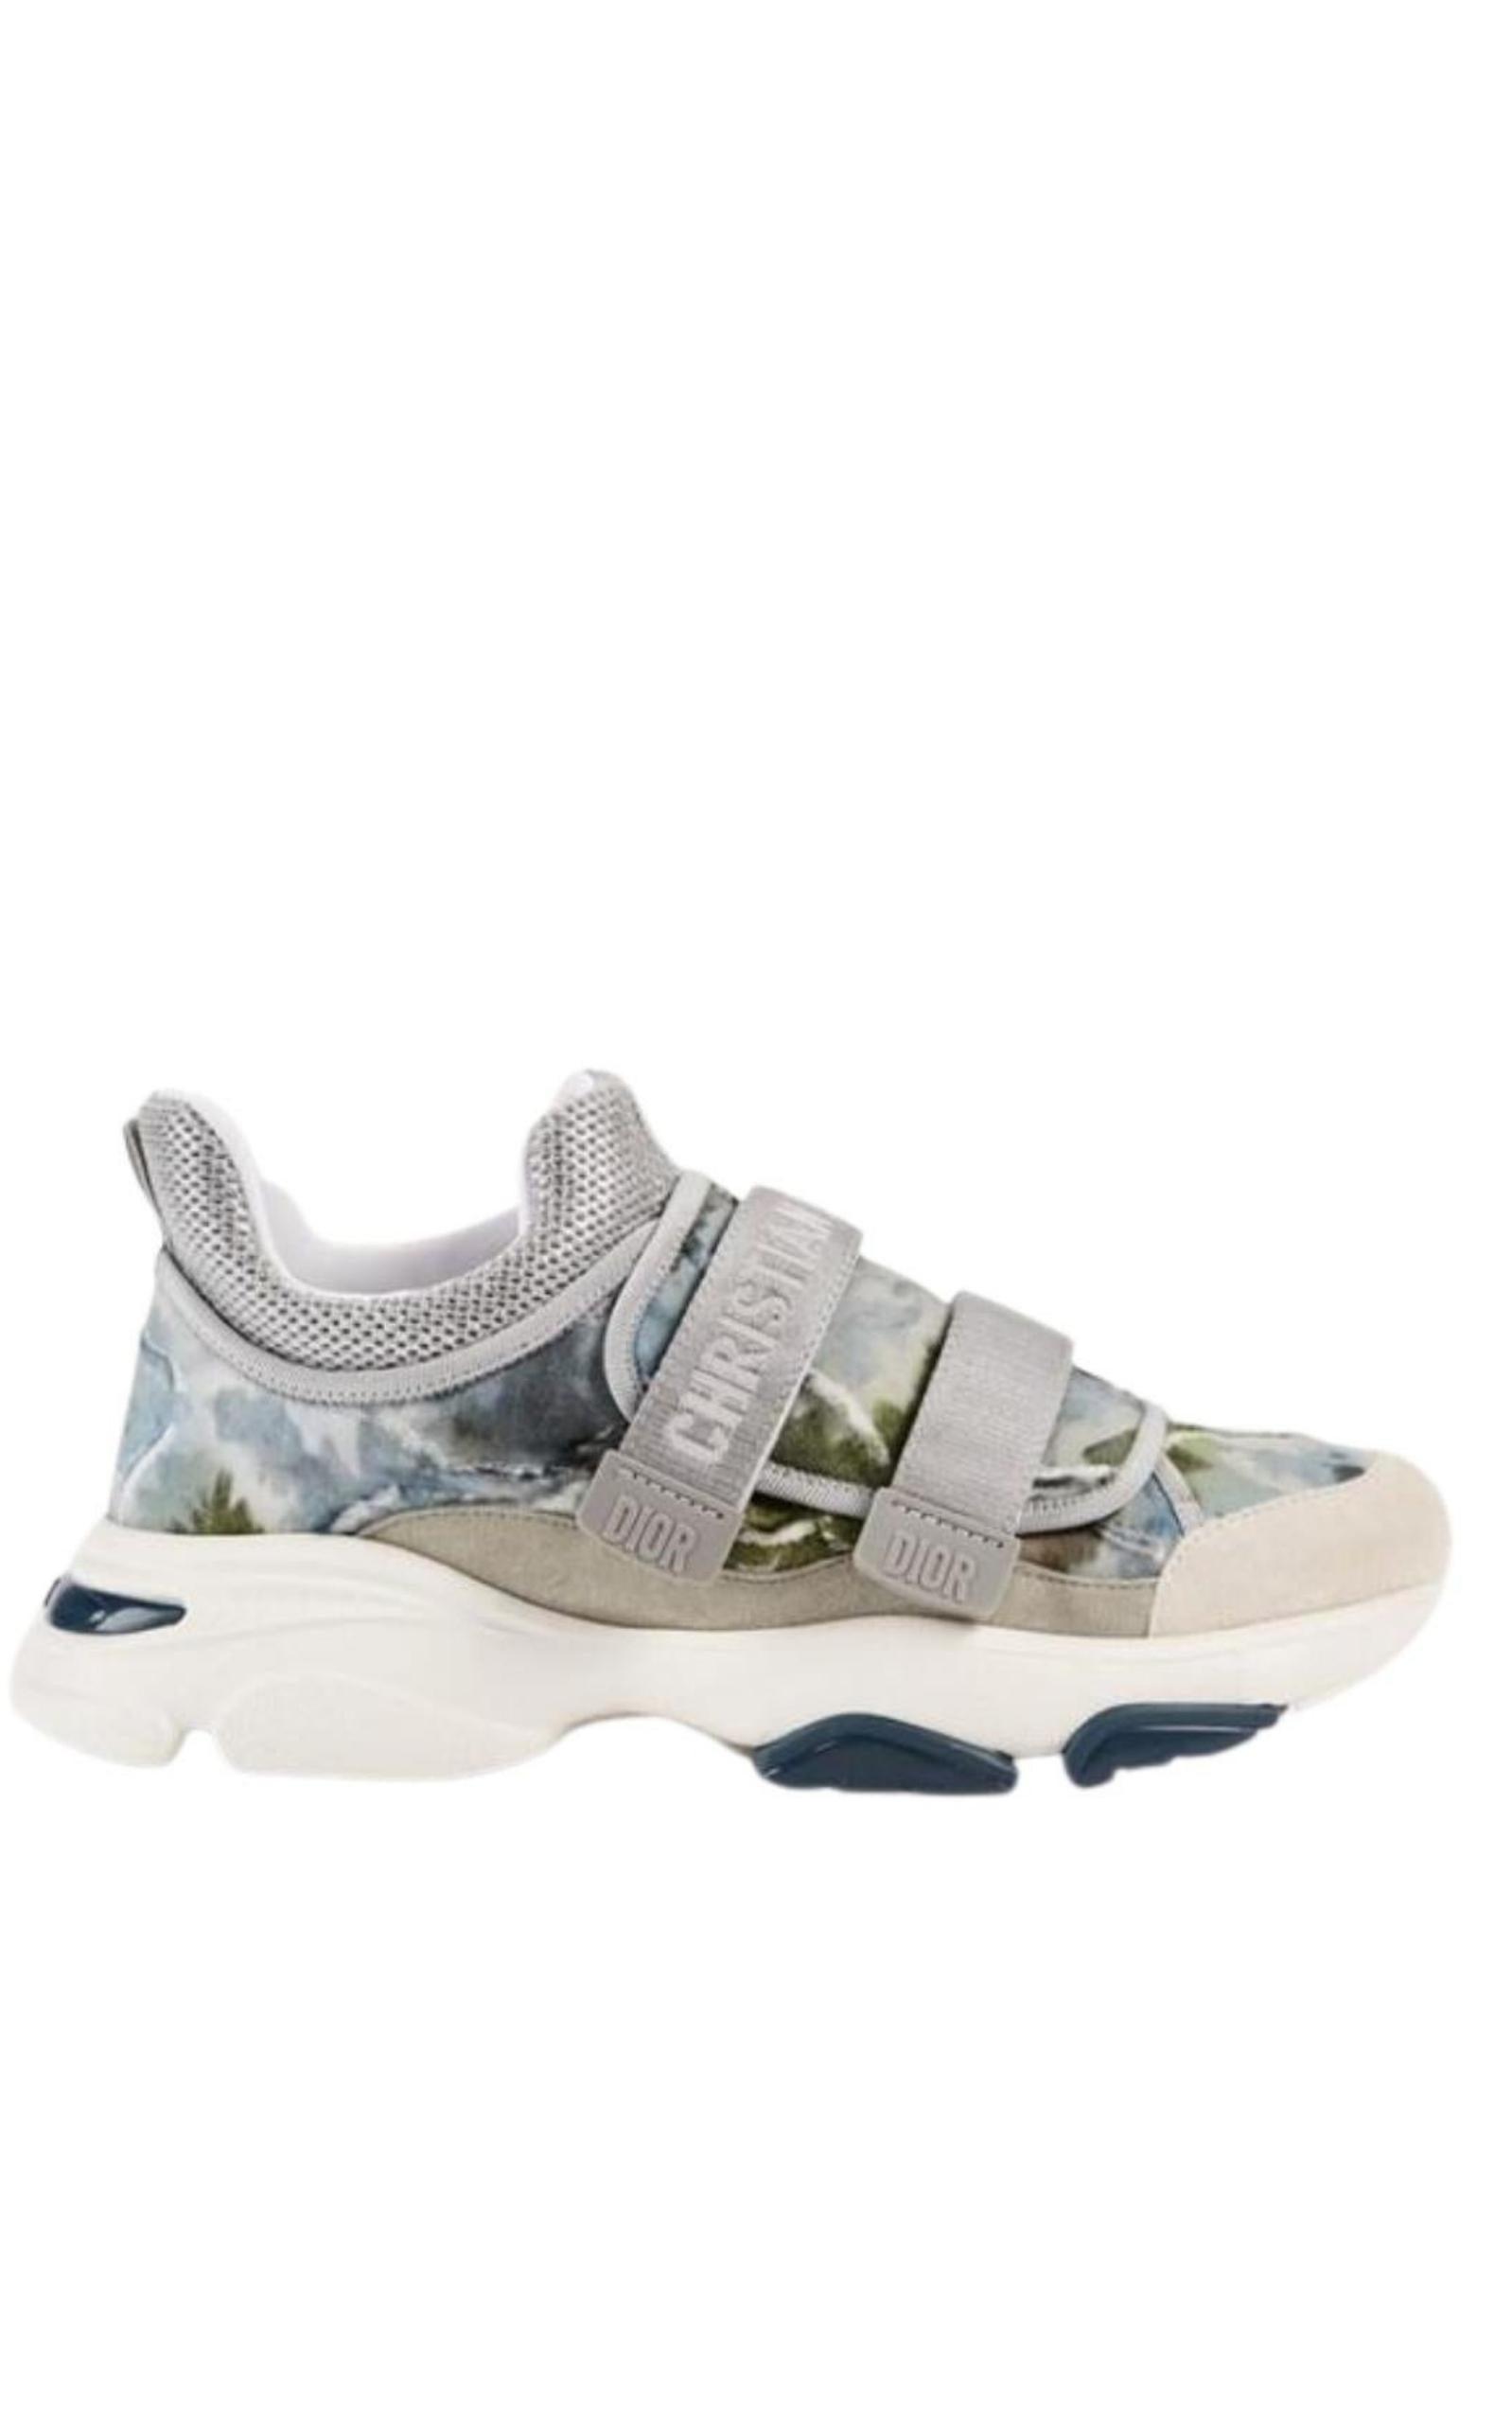 Dior D-Wander Camouflage Techno Fabric Sneakers | Runway Catalog